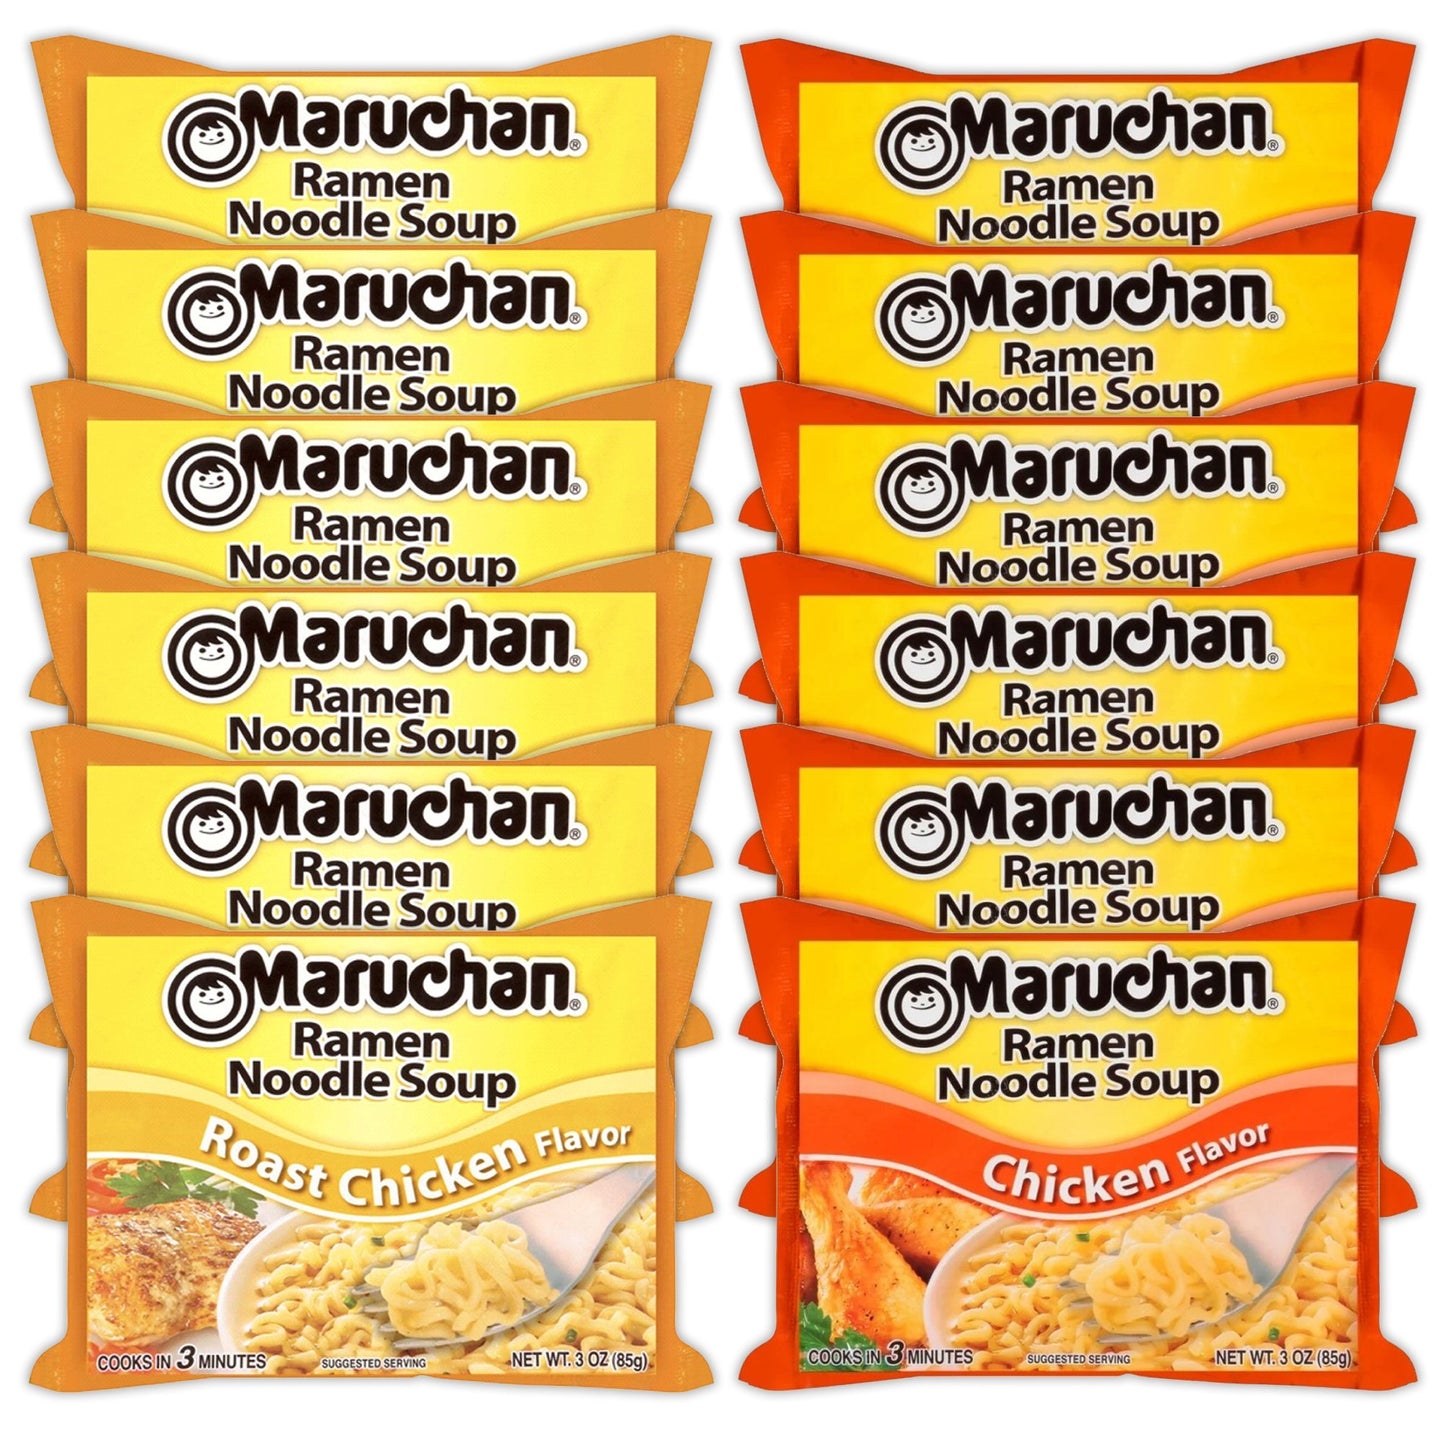 Maruchan Ramen Instant Noodle Soup Variety, 2 Flavors - 6 Packs Roast Chicken & 6 Packs Chicken , 3 Ounce Single Servings Lunch / Dinner Variety